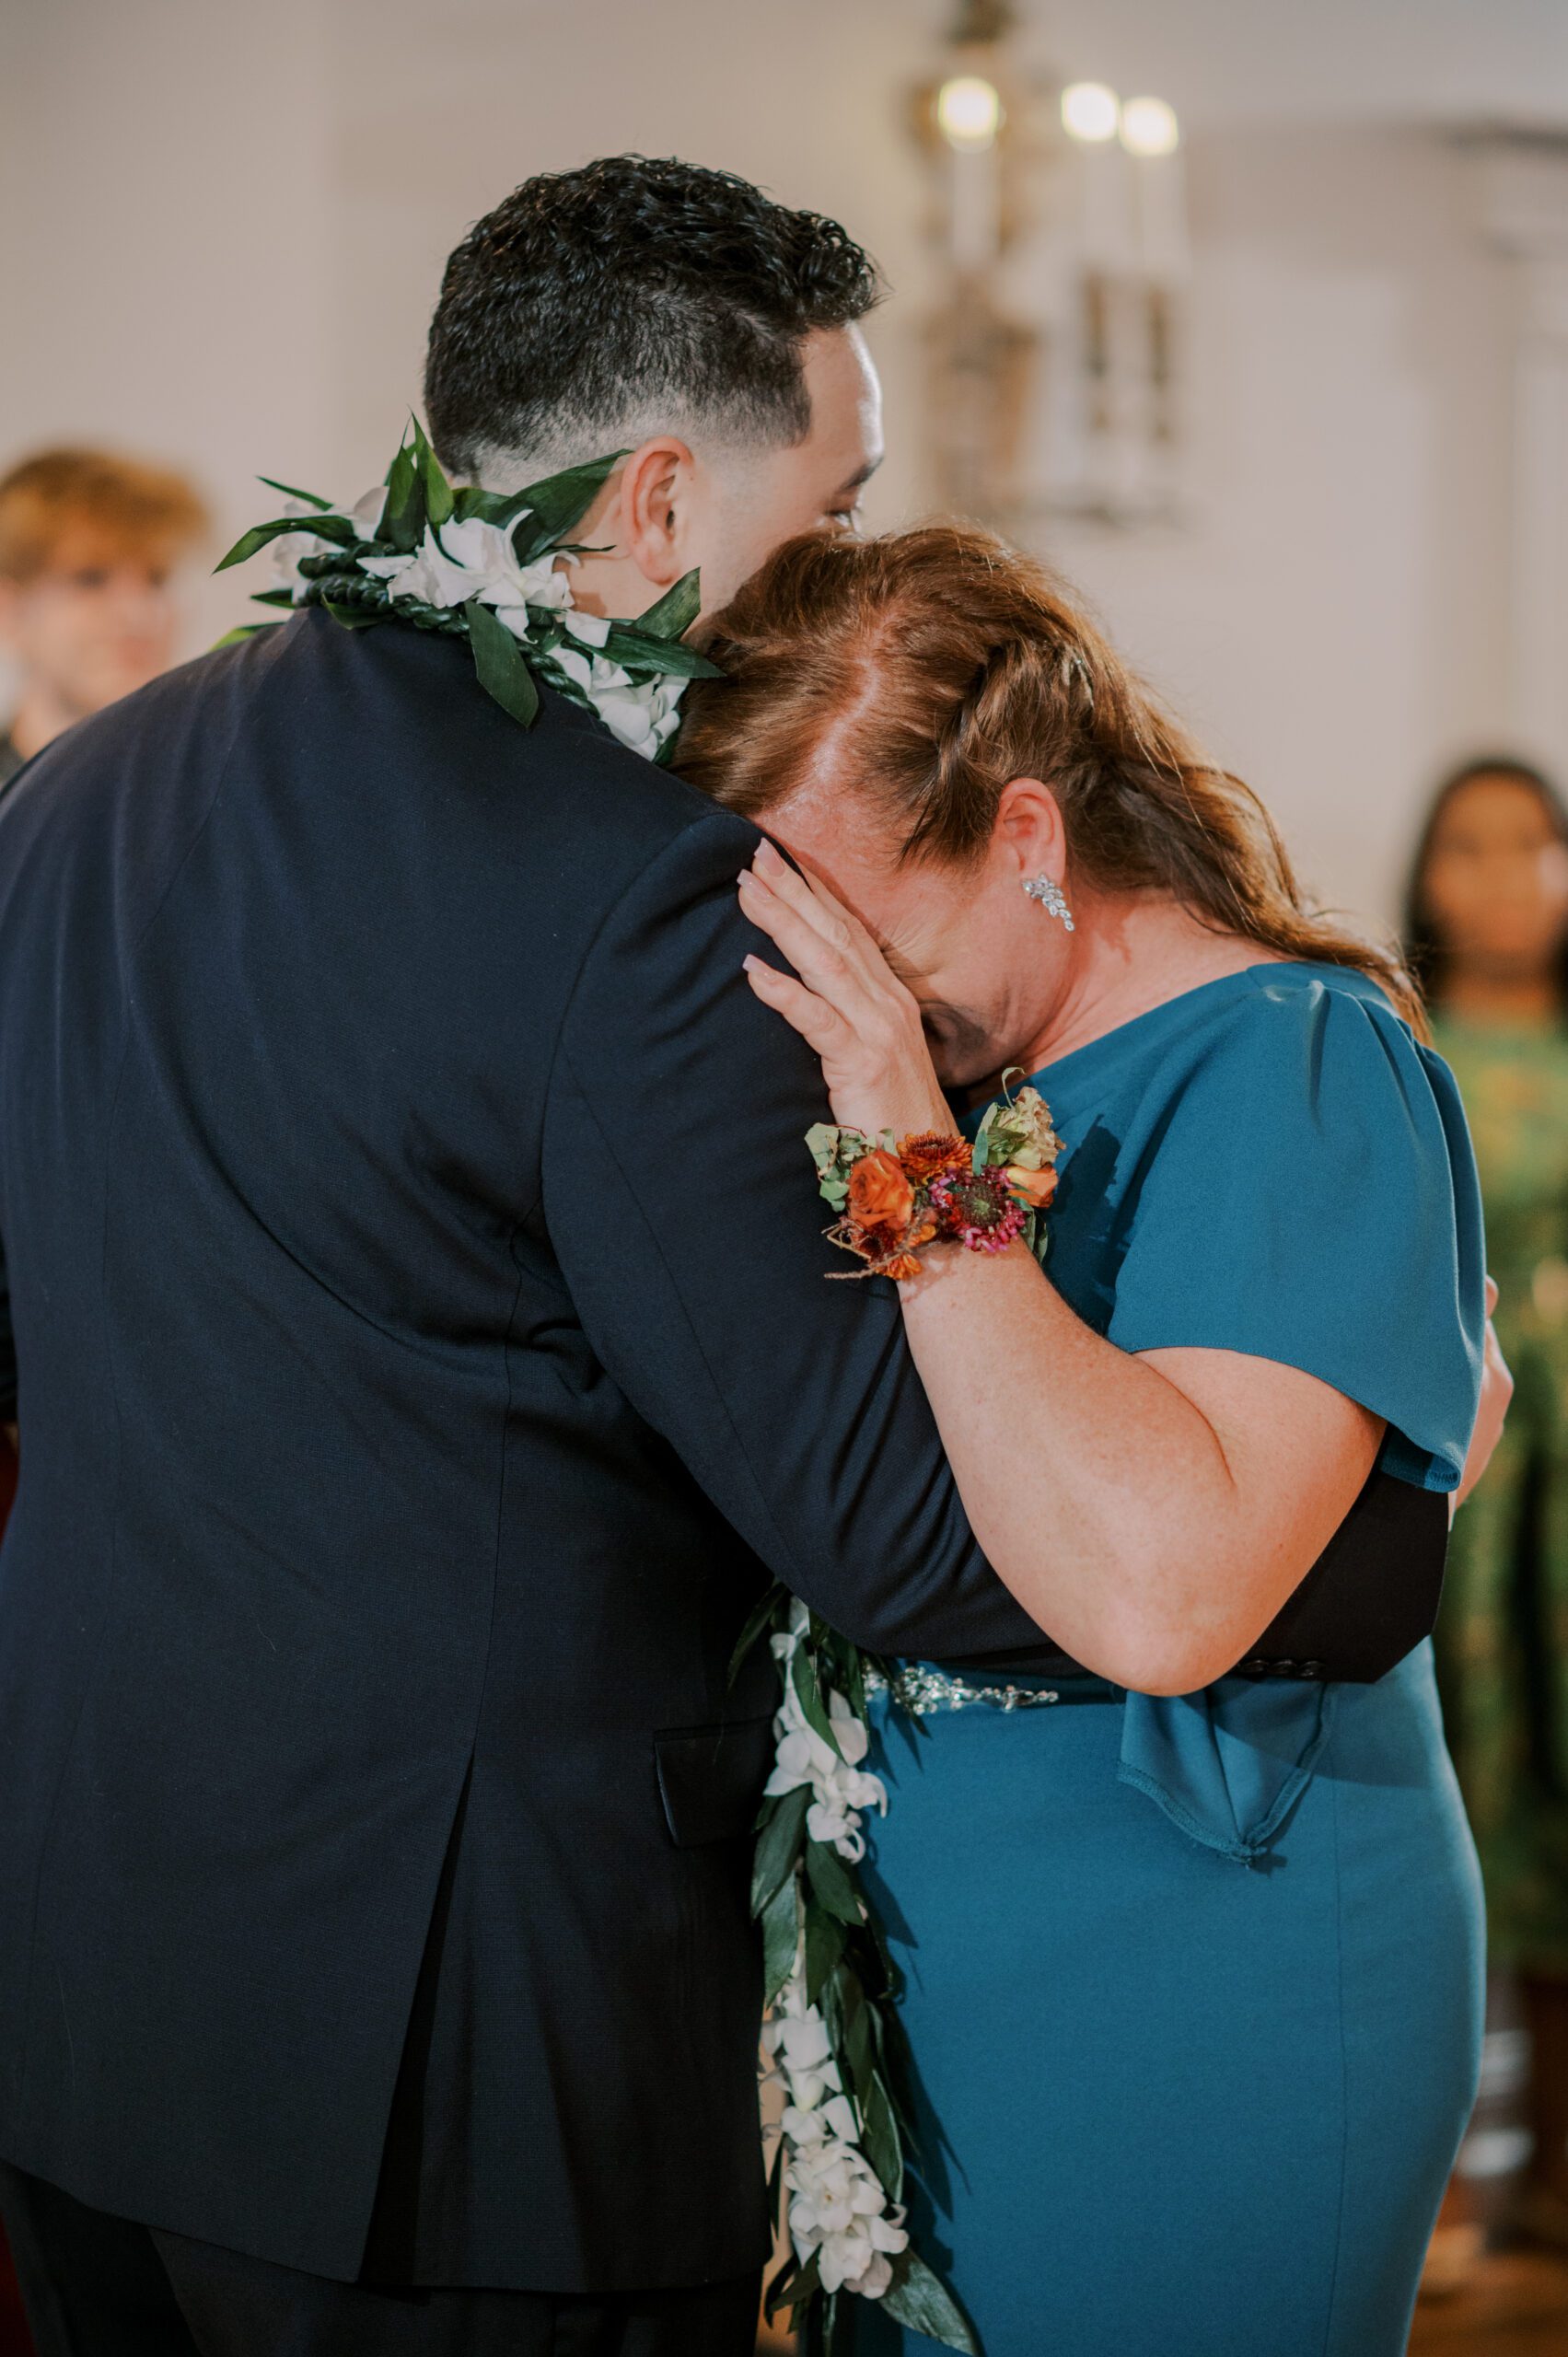 Groom and his mother embracing, mother with her face buired into groom's shoulder